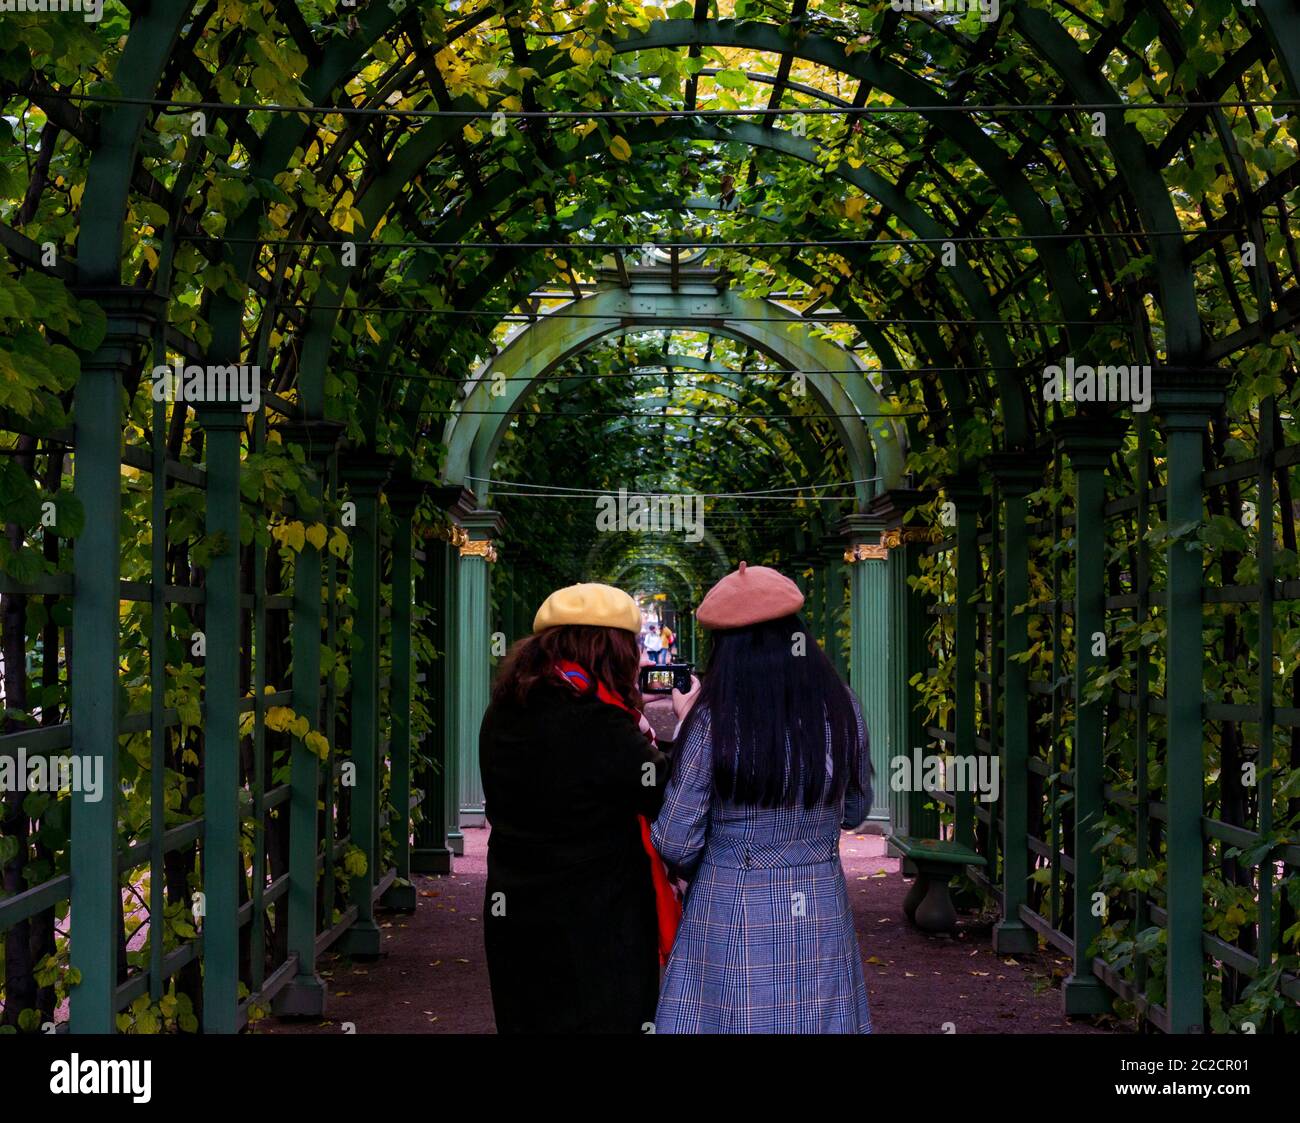 Young female Asian tourists wearing berets taking photo in arched trellis arbor in Autumn, Summer Garden, St Petersburg, Russia Stock Photo